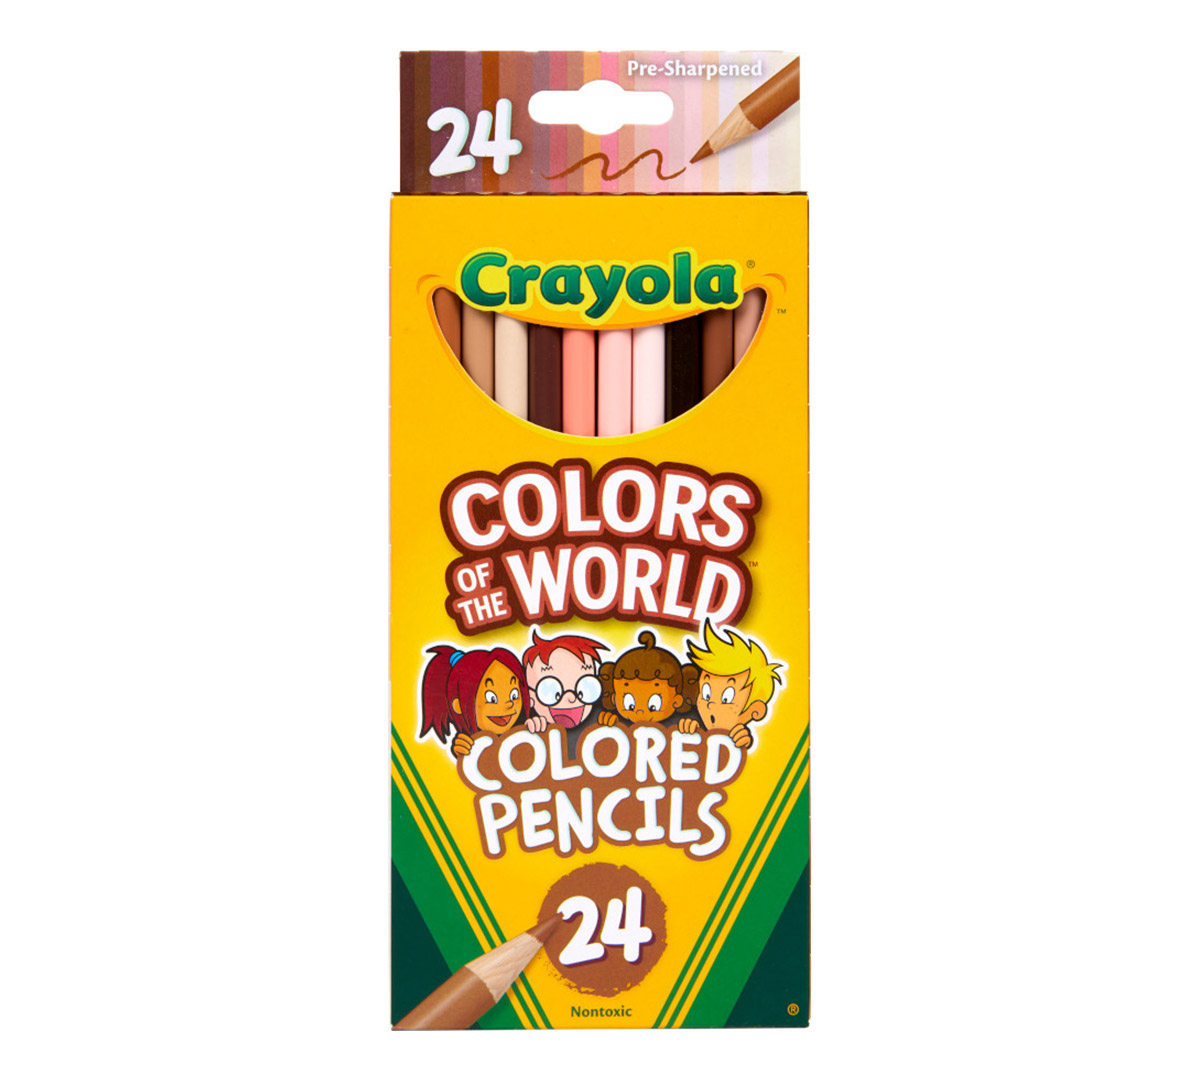 https://shop.crayola.com/on/demandware.static/-/Sites-crayola-storefront/default/dw6d61ad0a/images/68-4607-0-200_Colors-Of-The-World_Colored-Pencils_24ct_F1.jpg